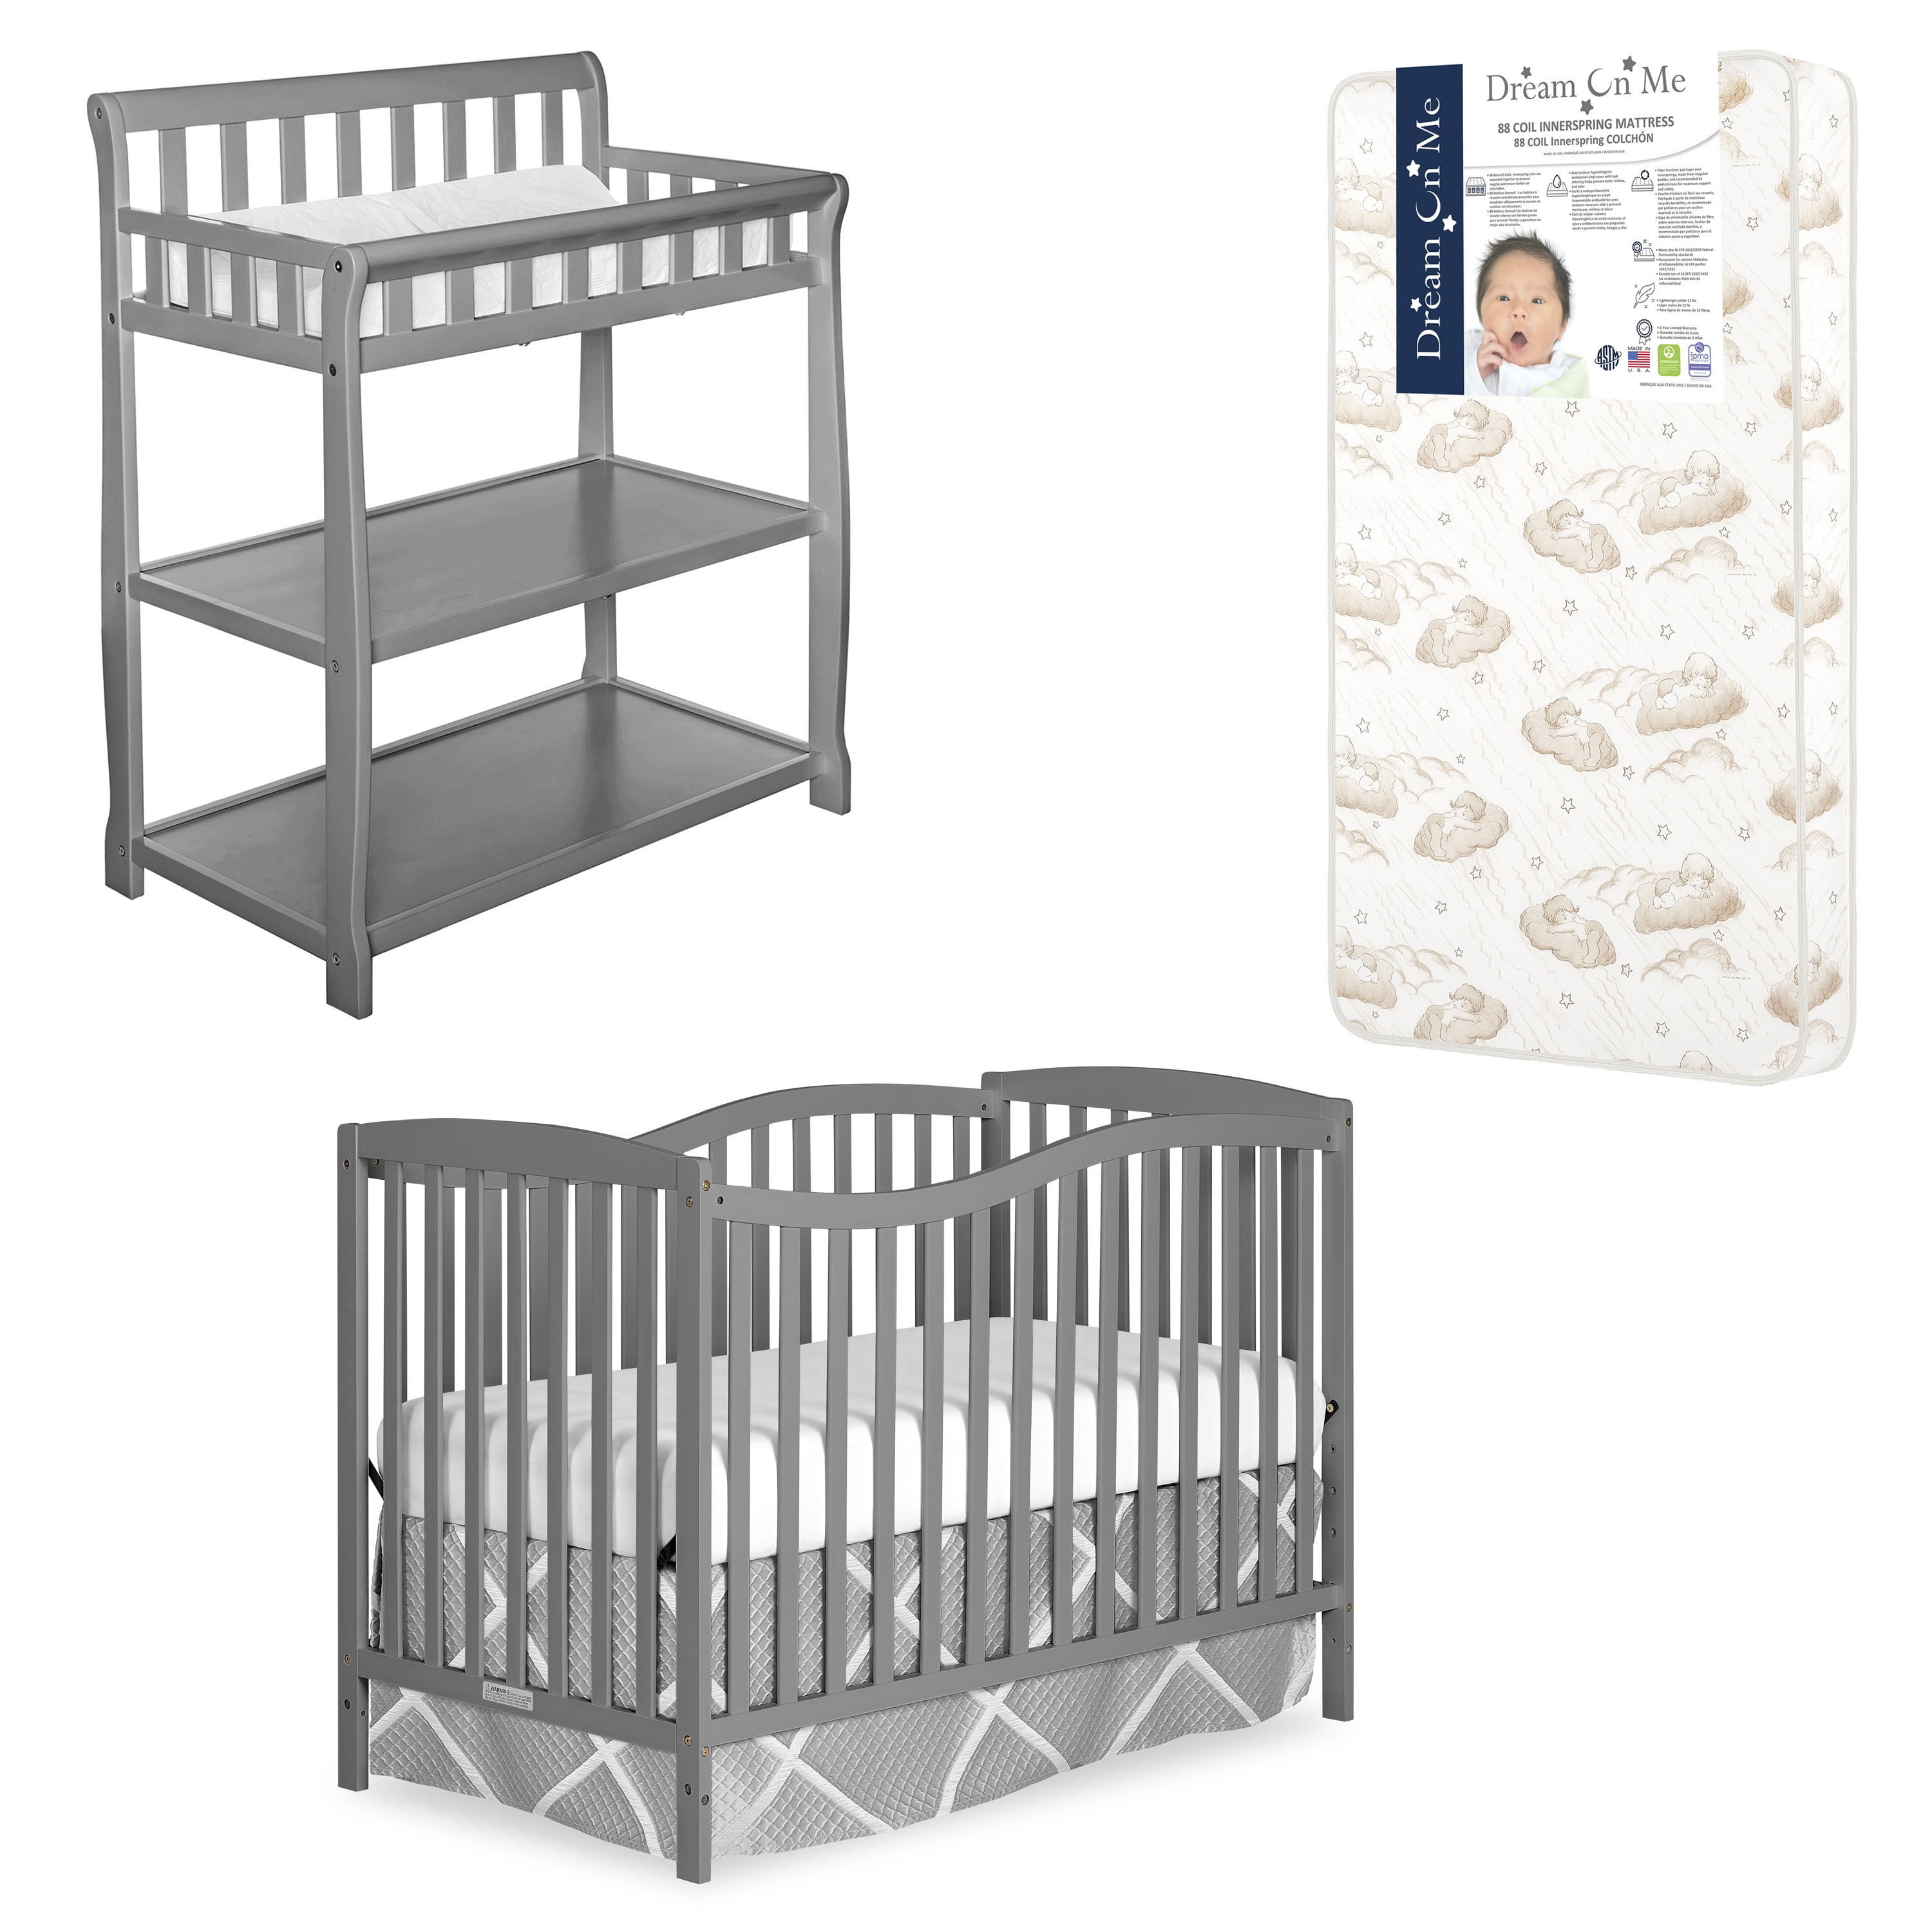 Nursery Bundle of Dream On Me Chelsea 5-in-1 Convertible Crib, Changing Table, Mattress